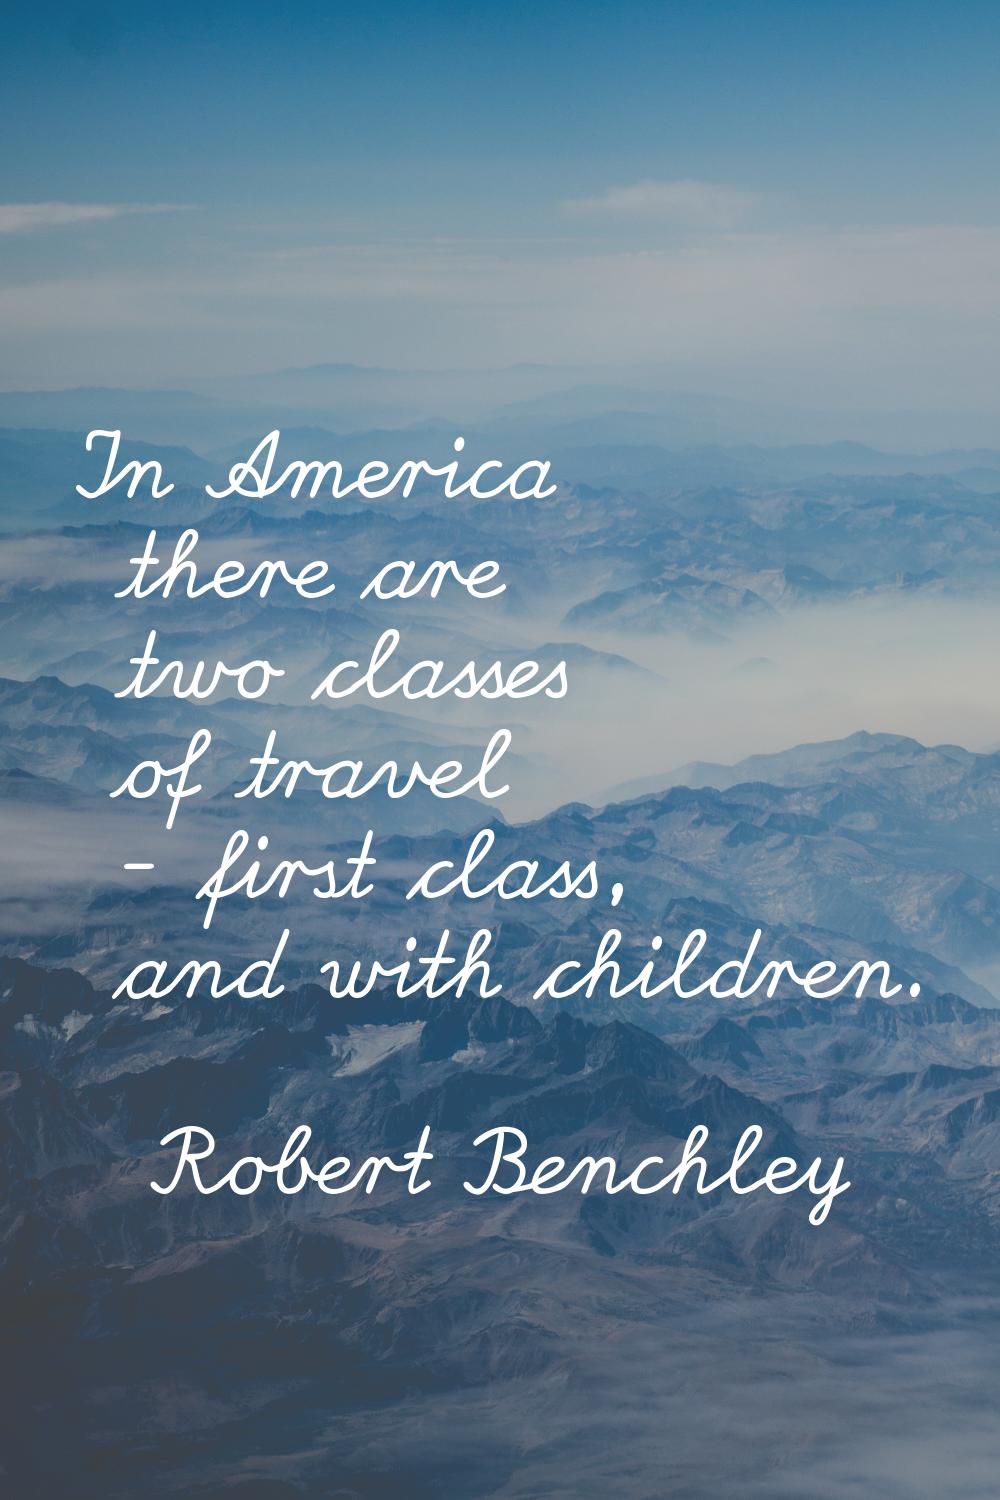 In America there are two classes of travel - first class, and with children.